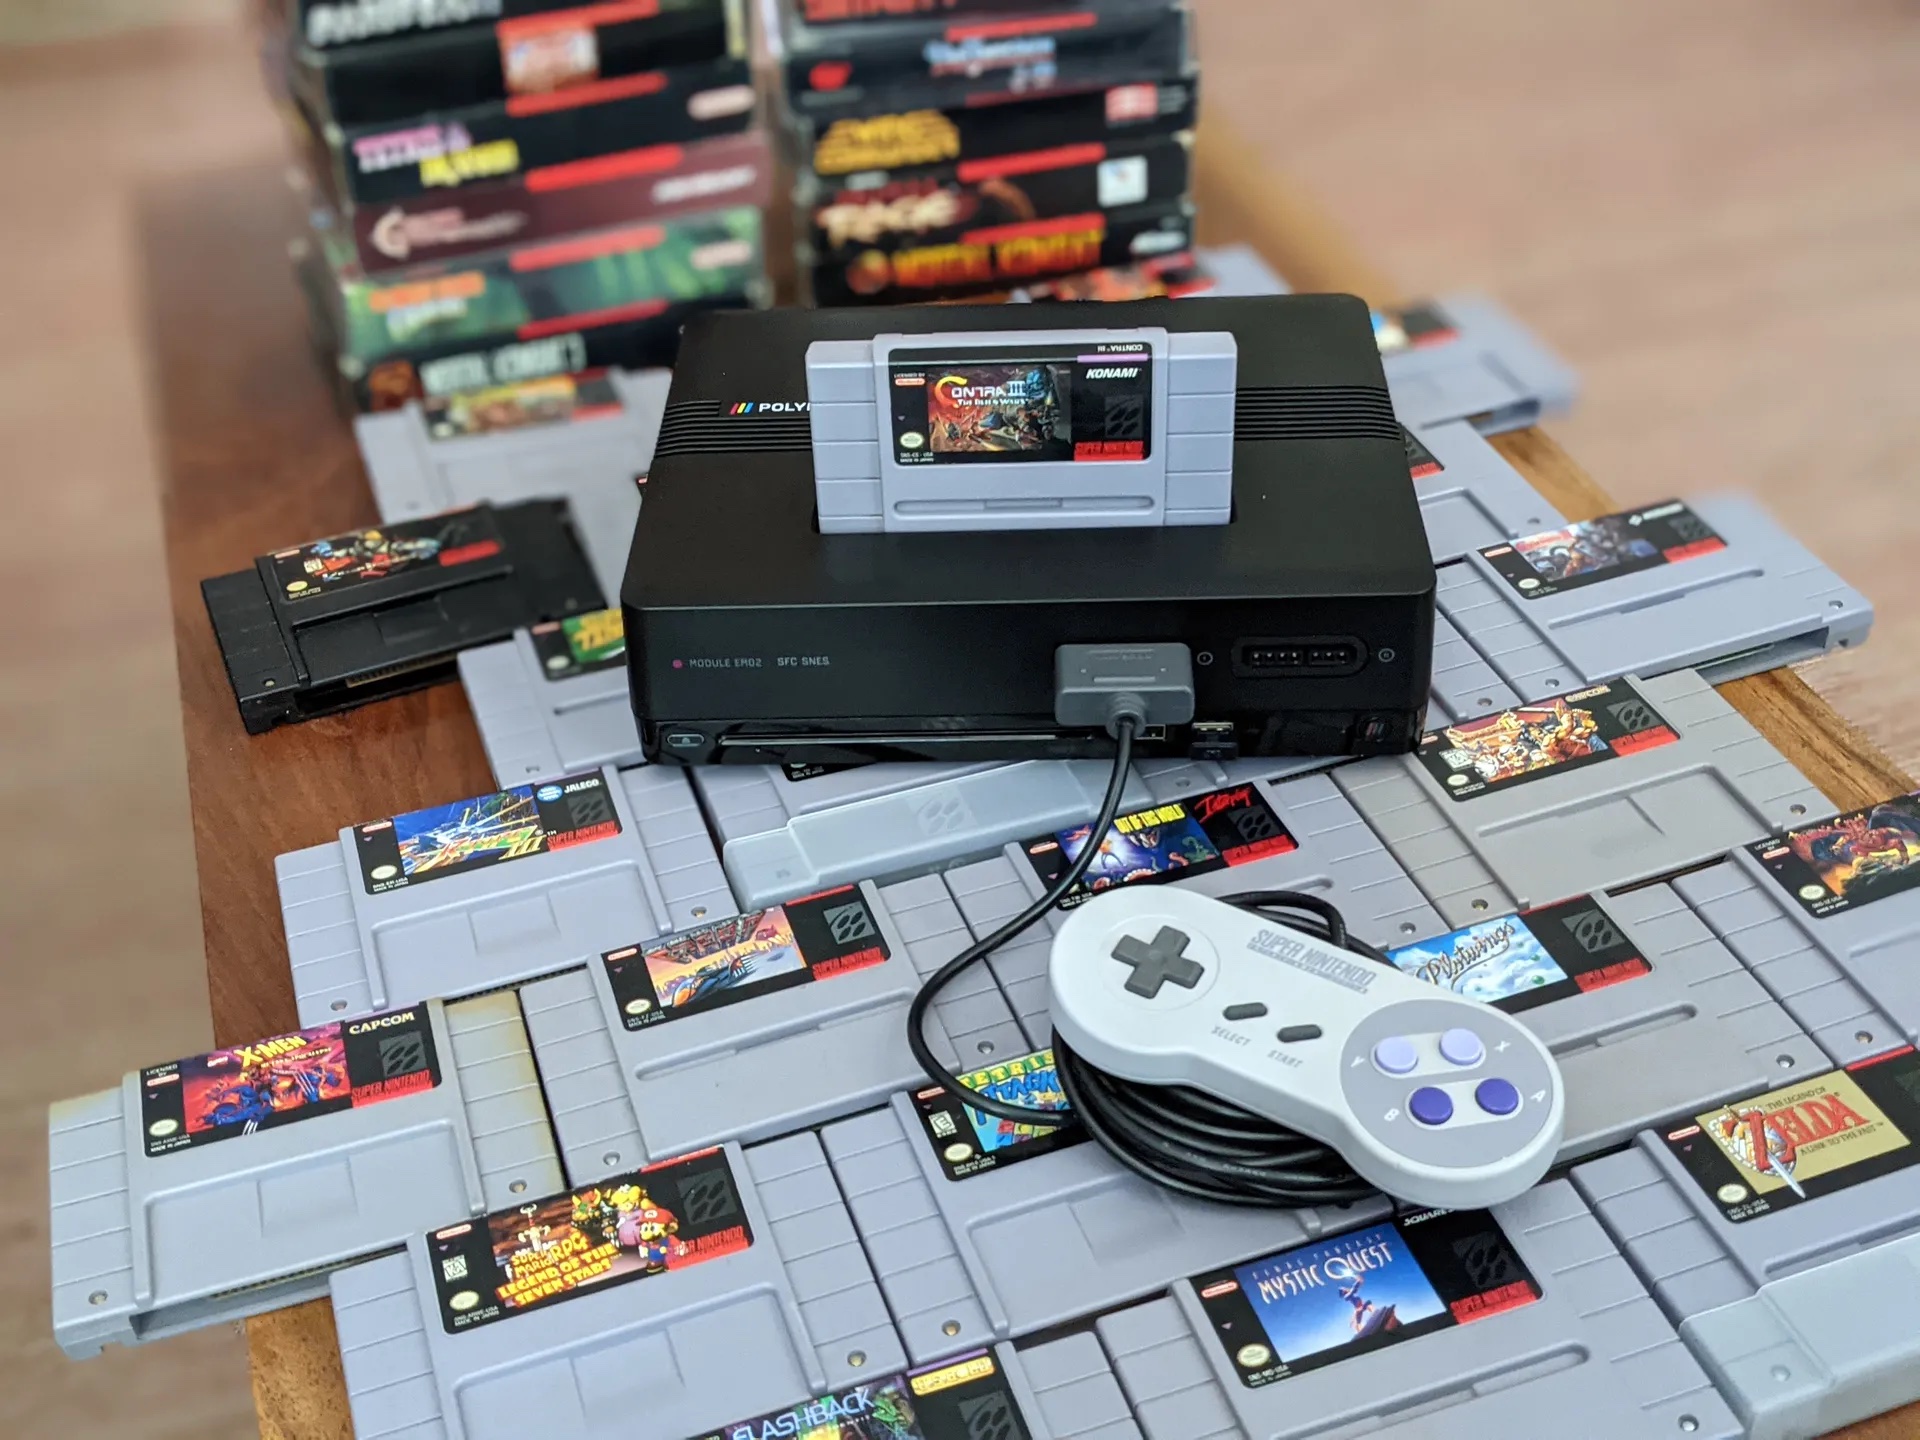 Compatible with NES, Super Nintendo and PS1 games: The Polymega retro console finally a date - NotebookCheck.net News